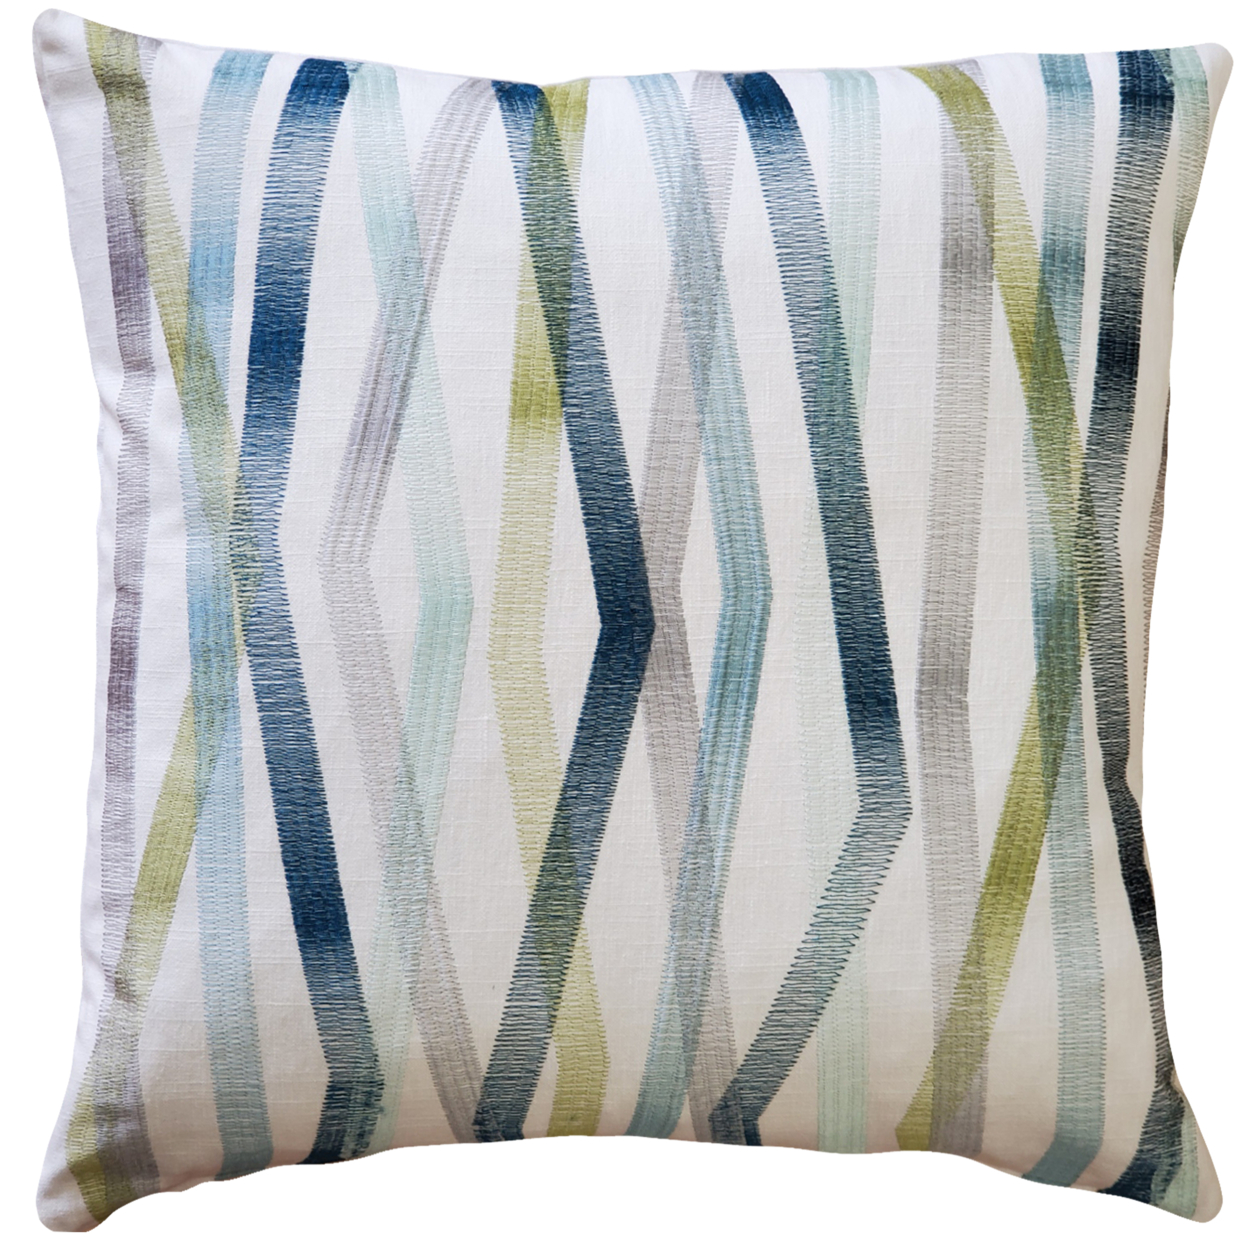 Wandering Lines Deep Sea Throw Pillow 19x19 Inches Square, Complete Pillow With Polyfill Pillow Insert